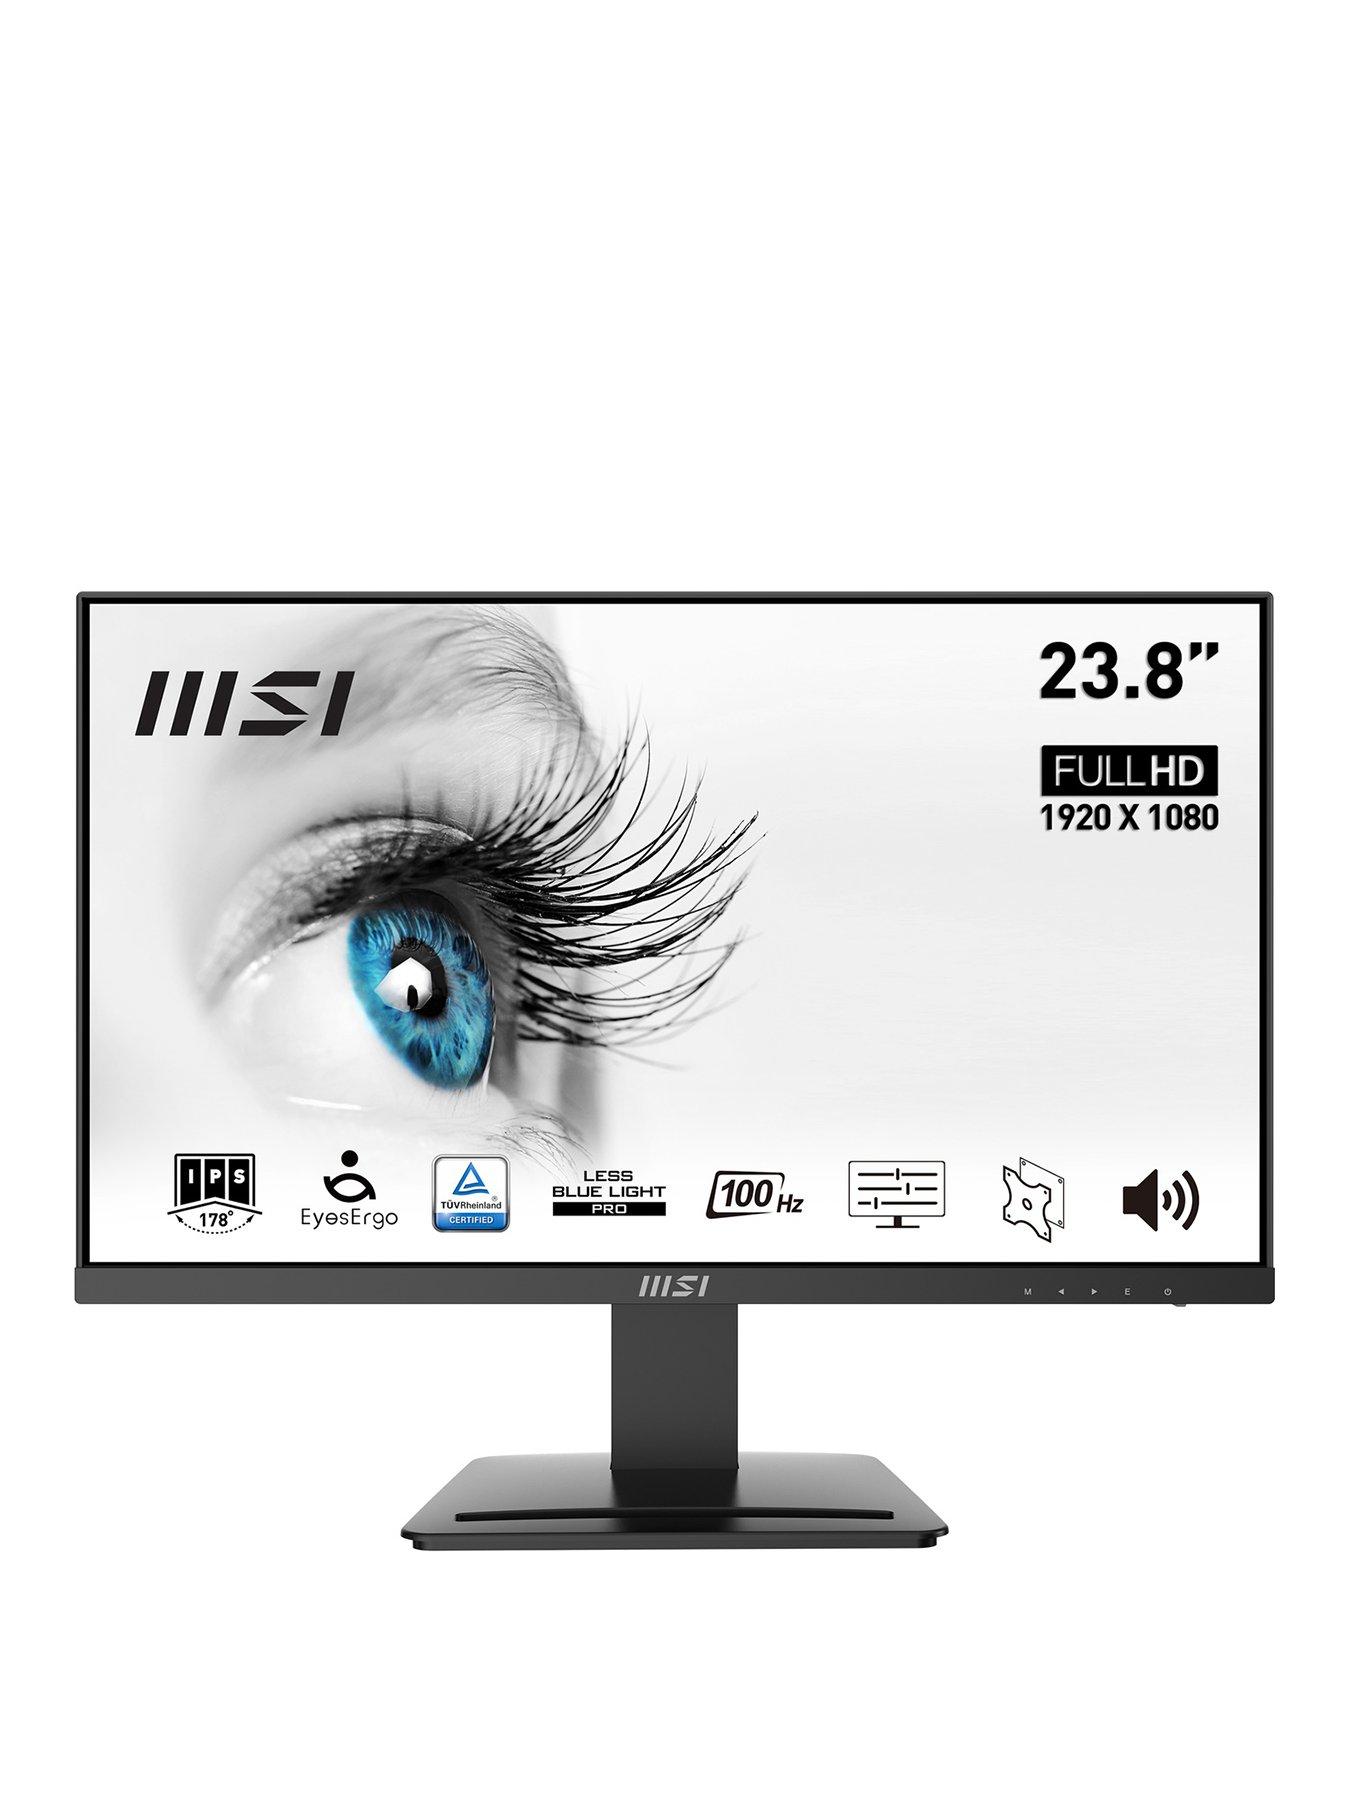 PRO MP2412, 100Hz Professional Business Monitor 23.8 inch